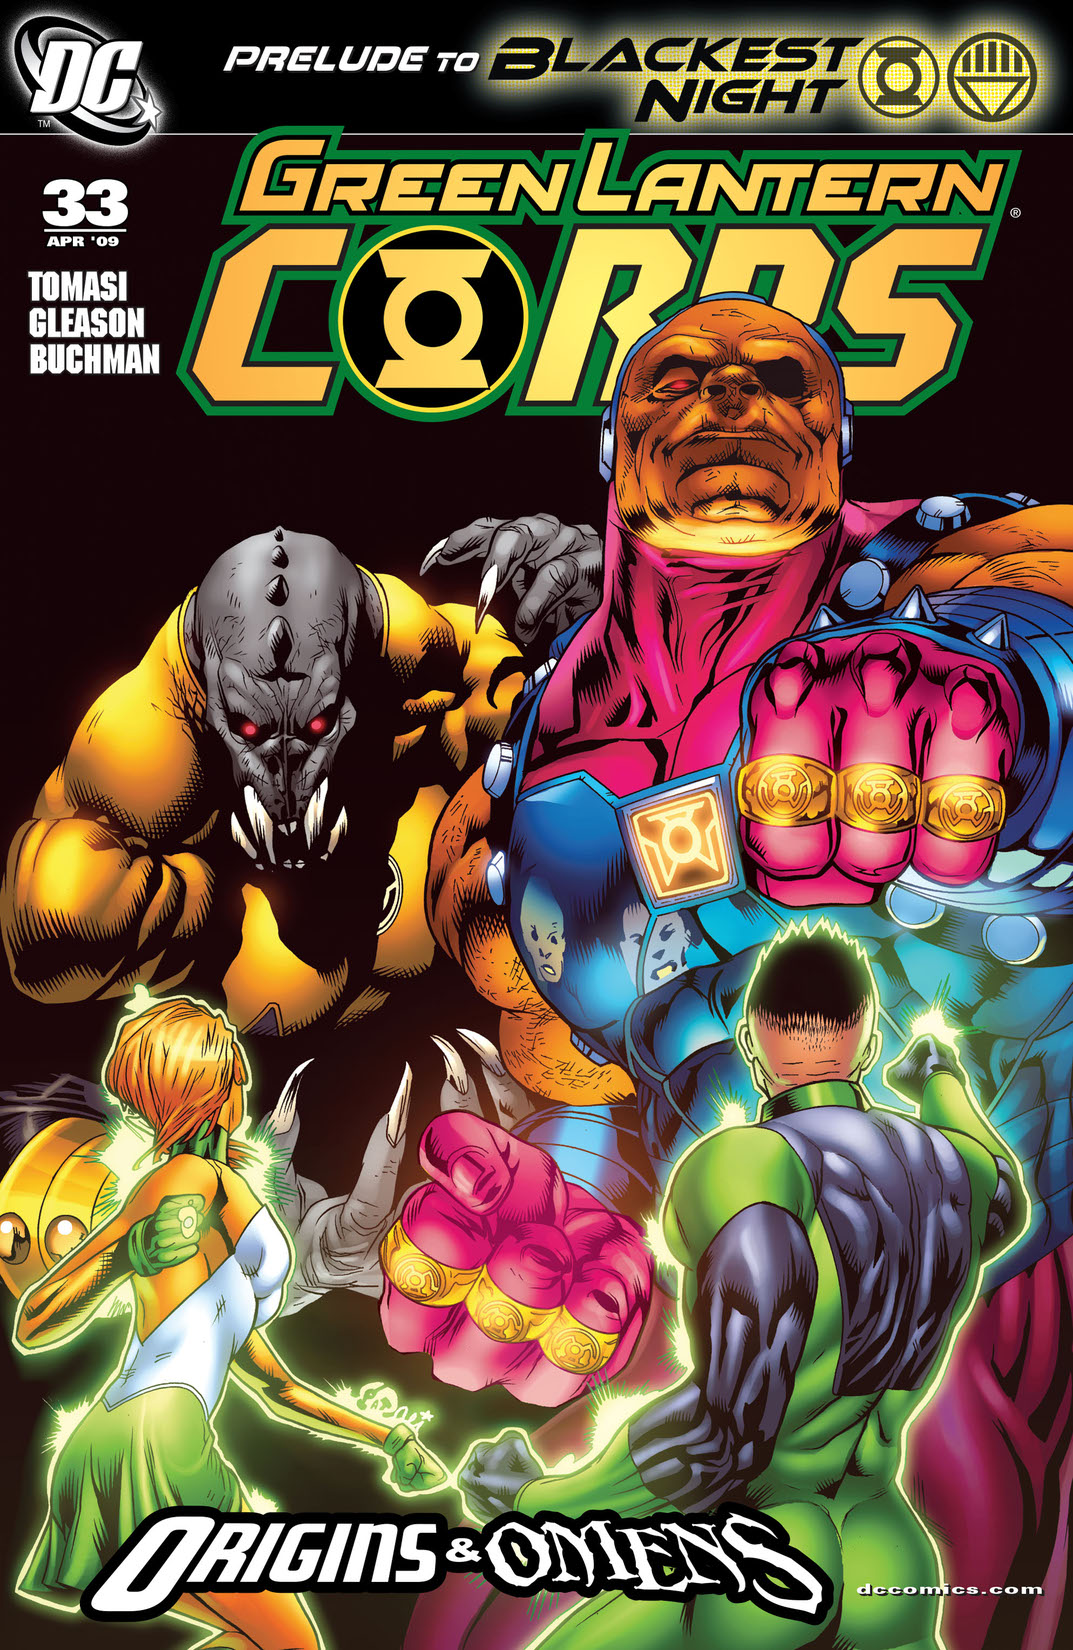 Green Lantern Corps (2006-) #33 preview images